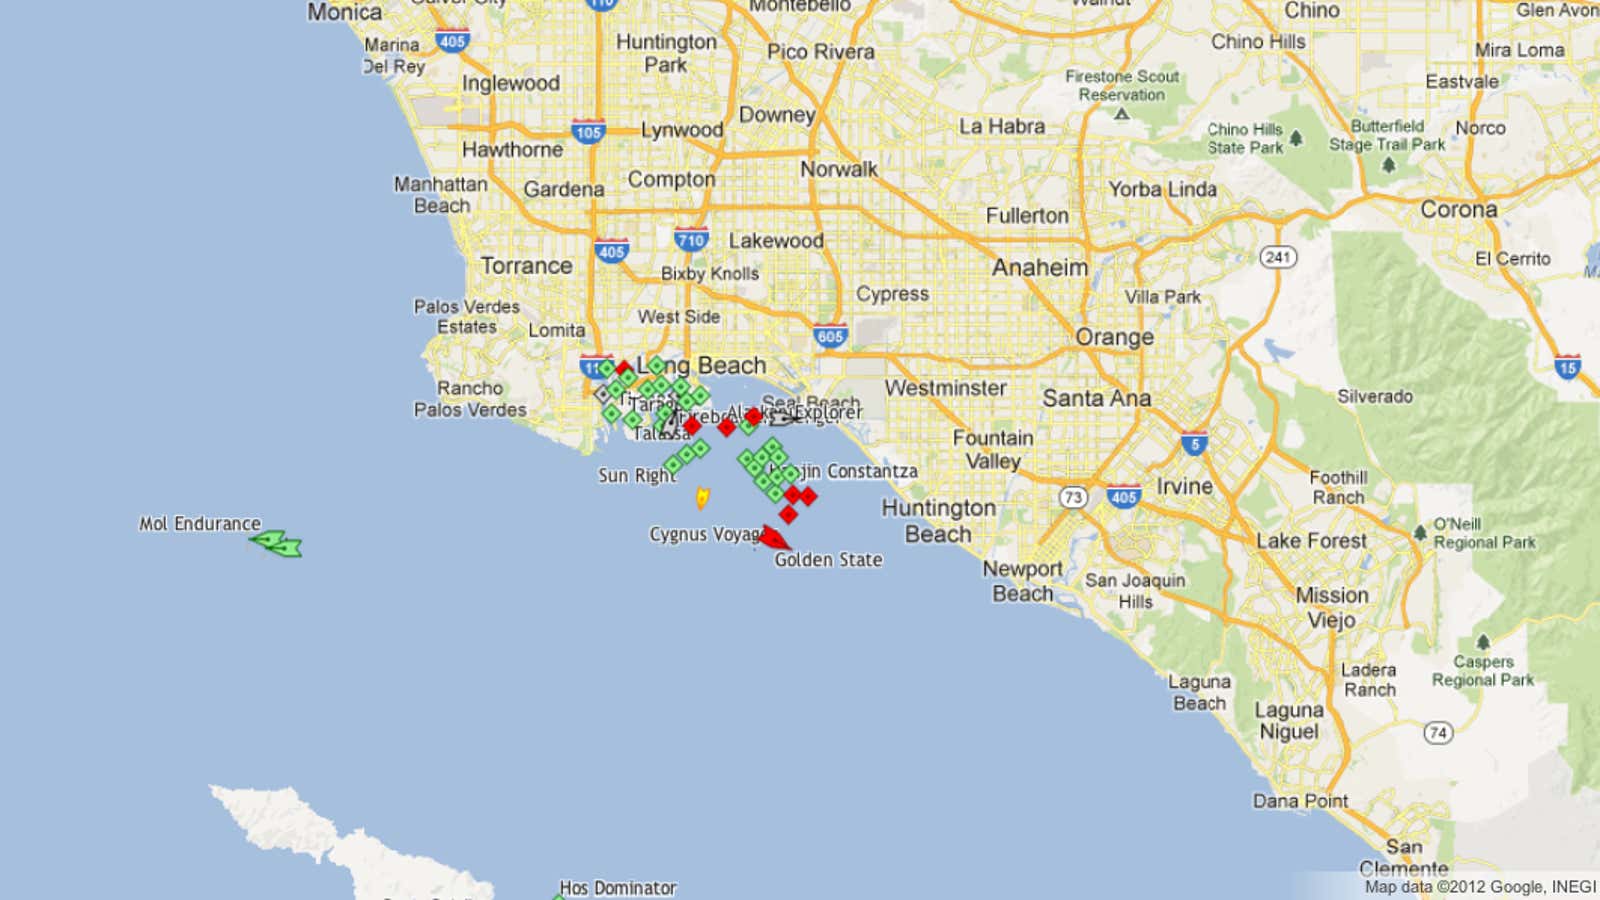 Container ships (green) idle around the twin ports of Los Angeles and Long Beach December 4, approx. 7am Pacific Time